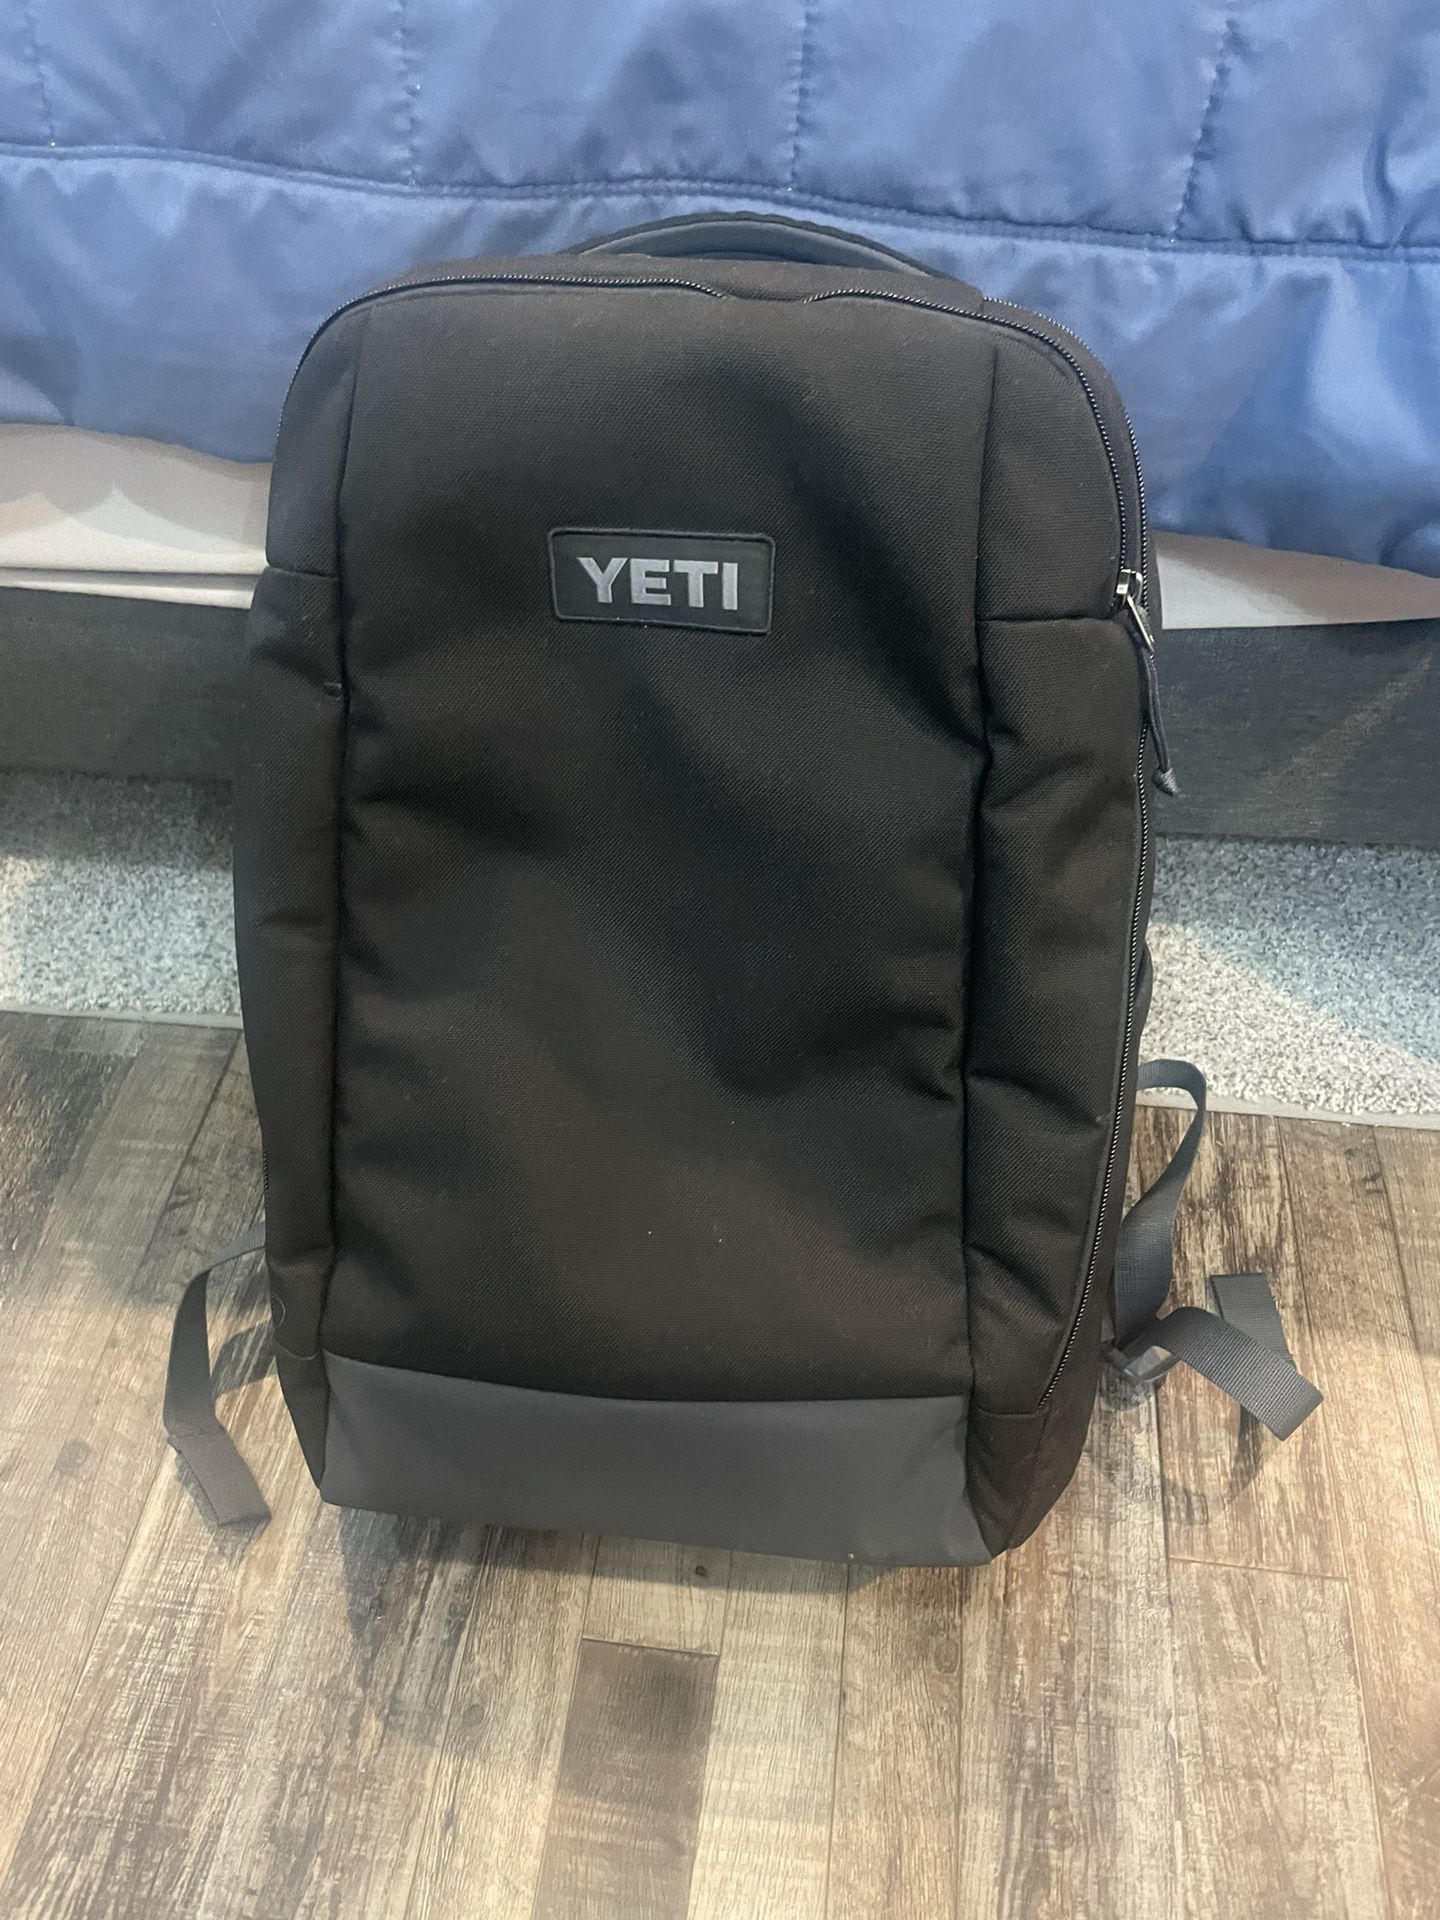 YETI Crossroads Backpack 23 Review